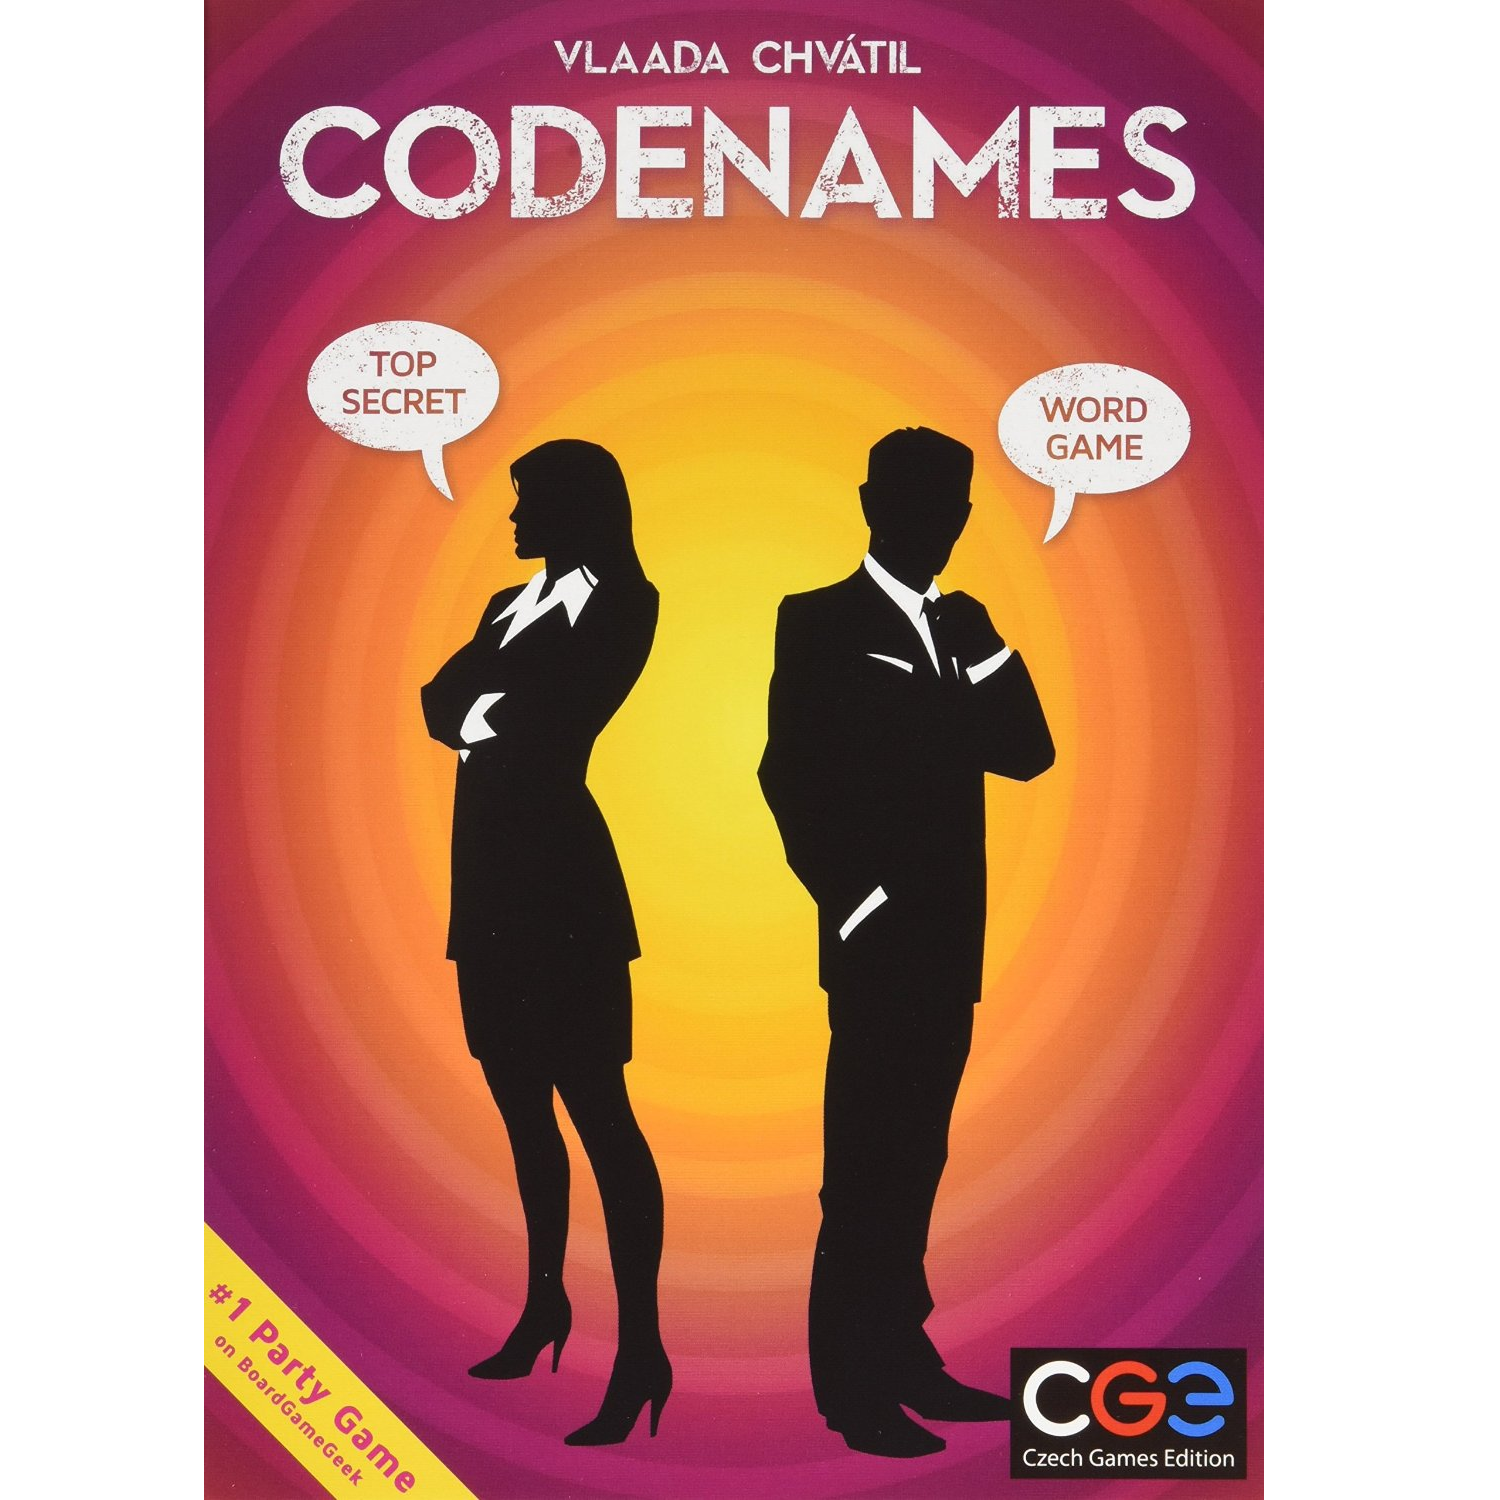 PRICE DROP! Codenames Board Game Only $12.37! (Amazon #1 Seller in Board Games!)